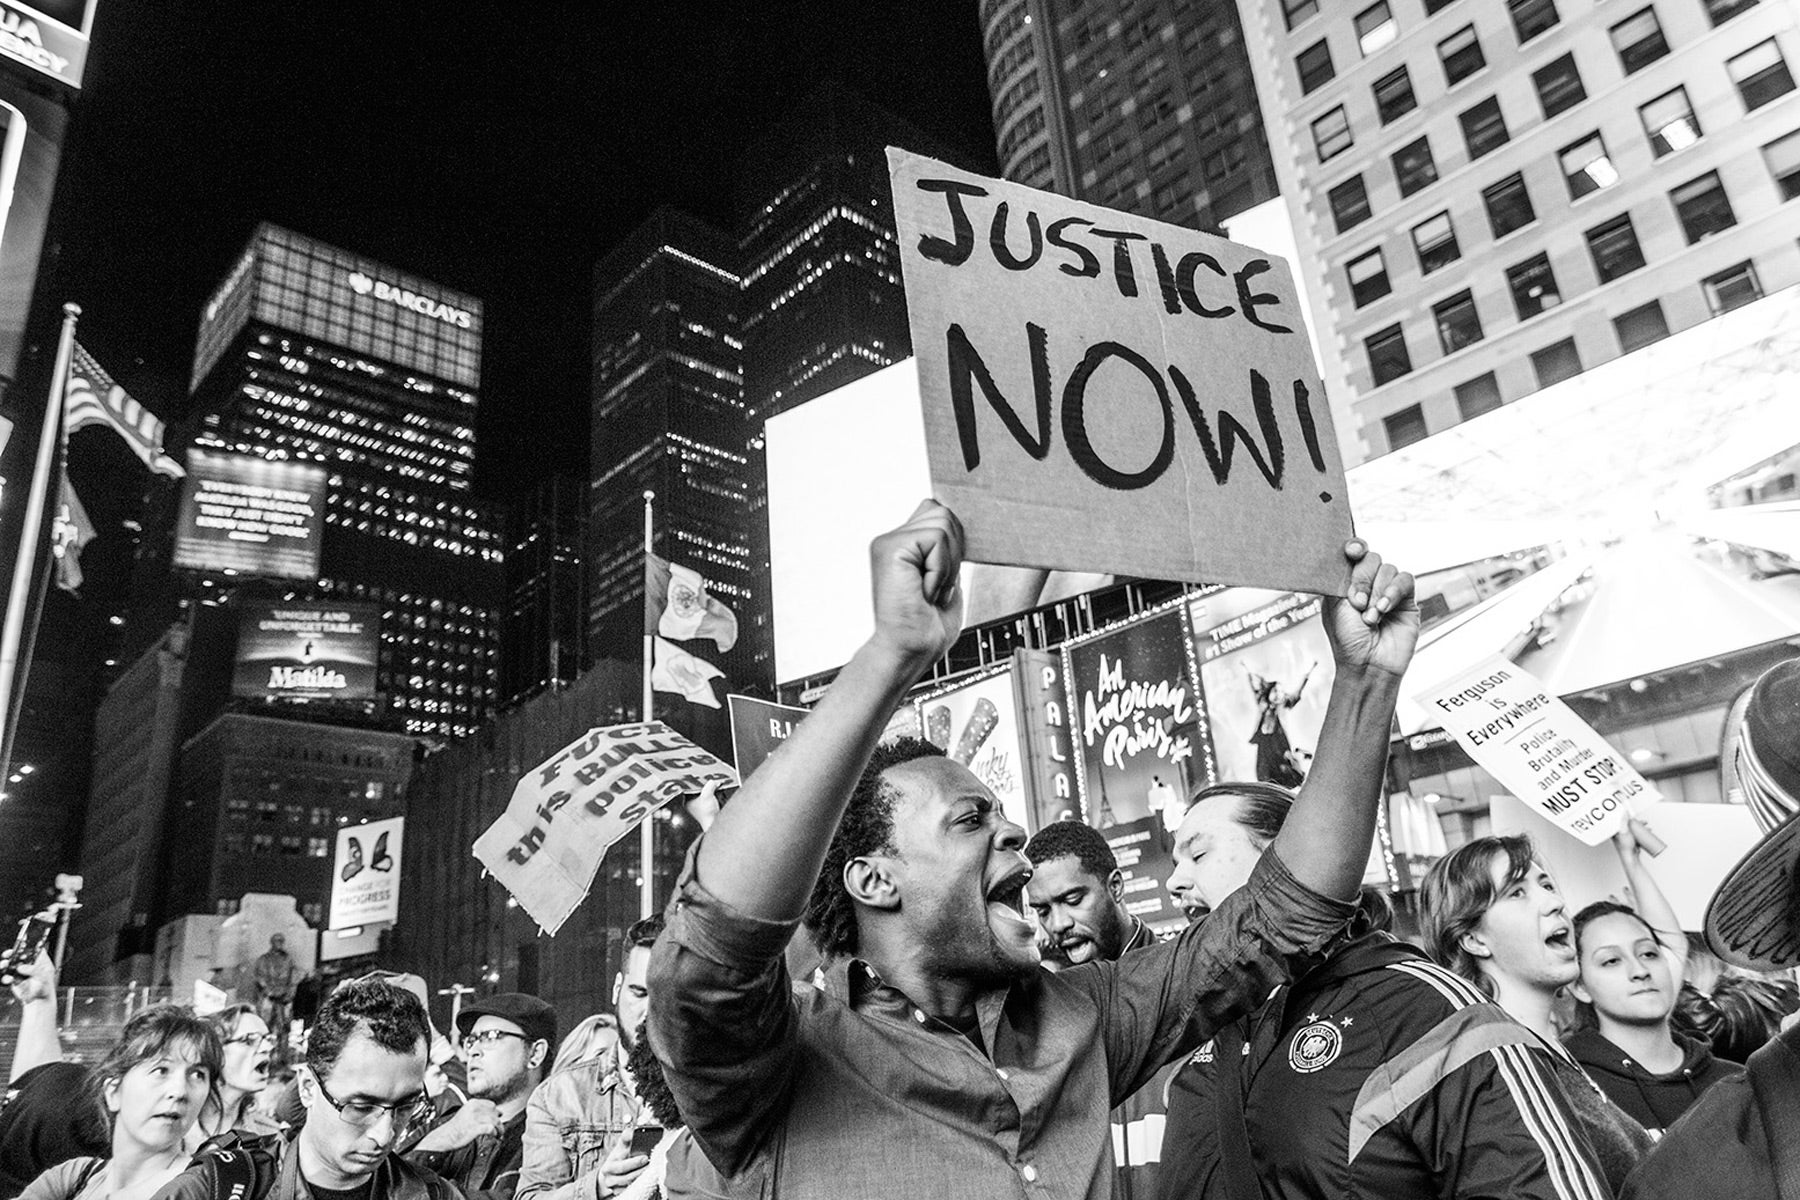 Revolutionary Soundtrack: 9 Songs to Get You Fired Up for Justice